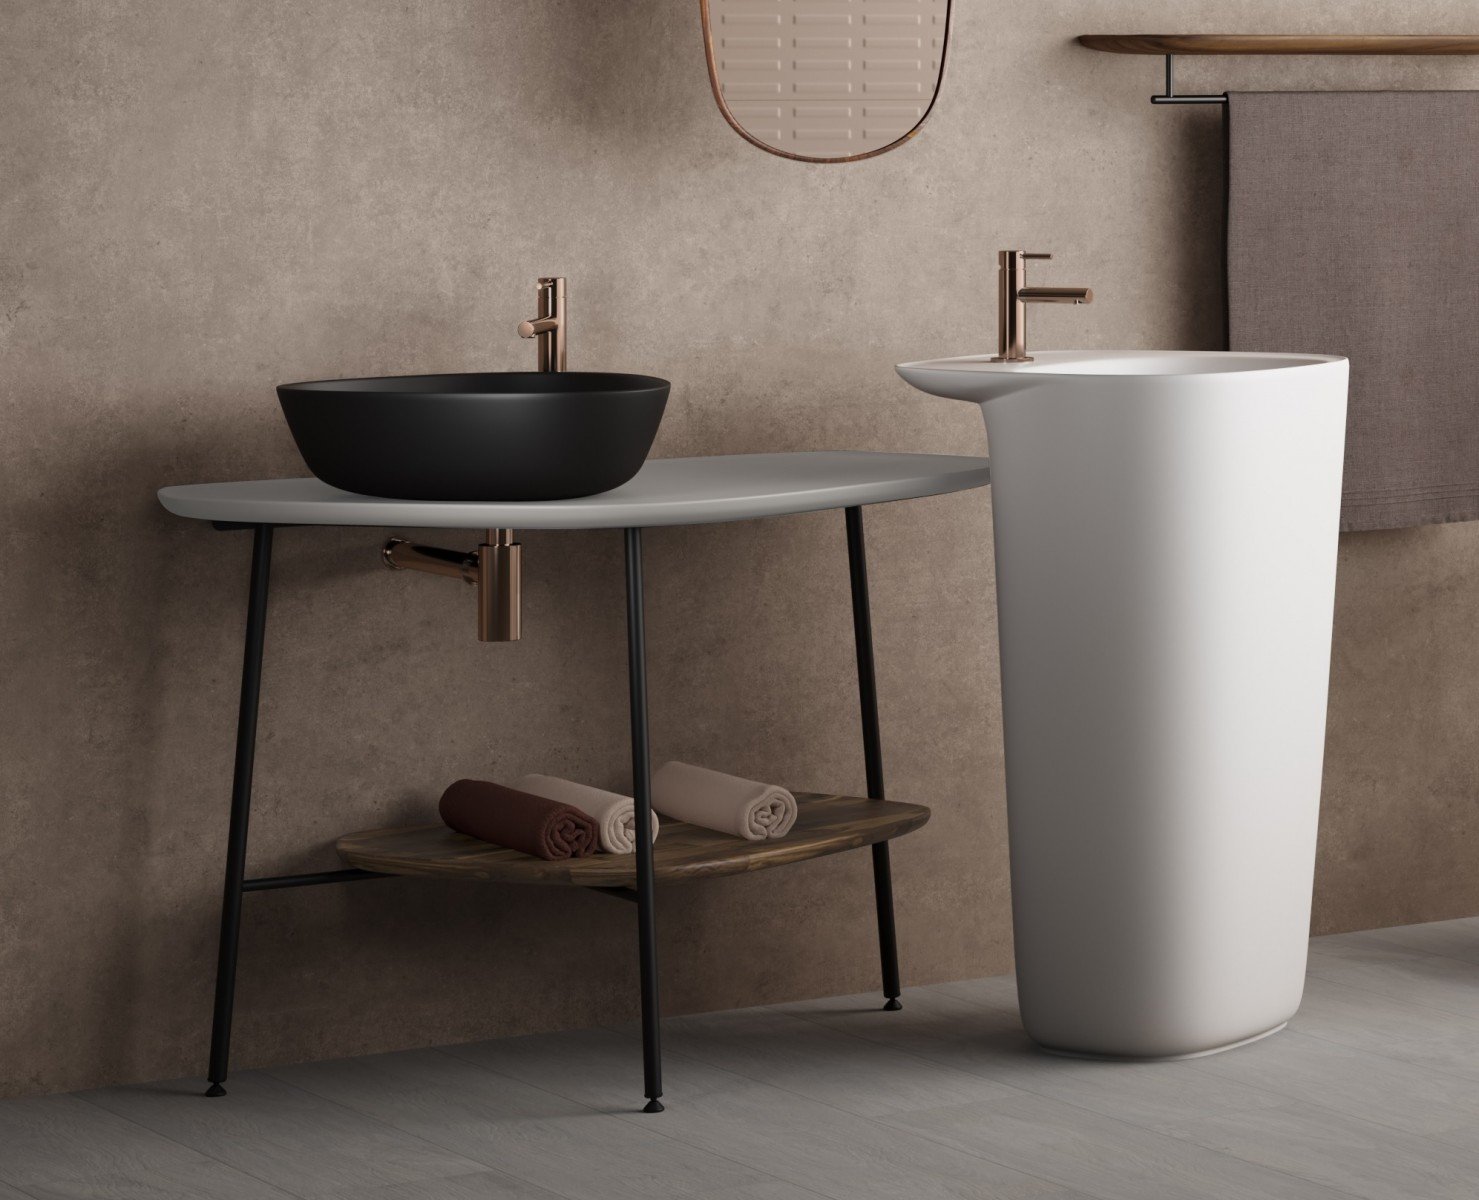 PLURAL Collection – Ceramic Counter, Monoblock Sink & Vessel Sink-related